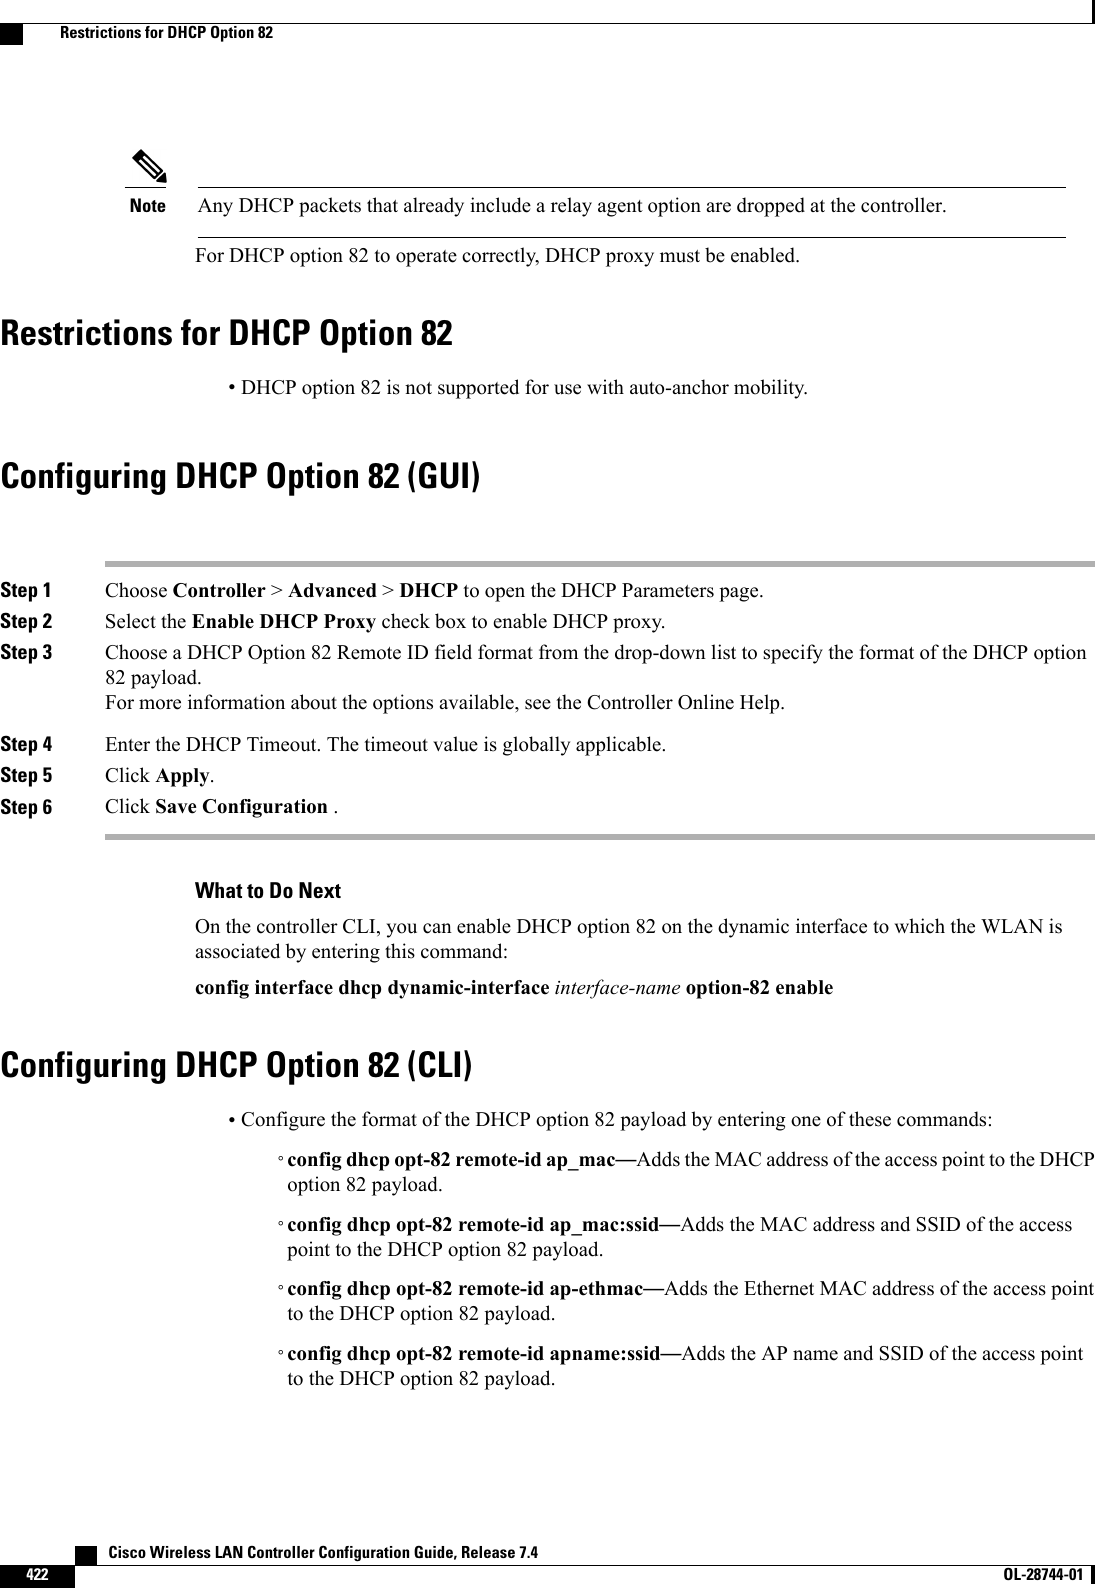 Any DHCP packets that already include a relay agent option are dropped at the controller.NoteFor DHCP option 82 to operate correctly, DHCP proxy must be enabled.Restrictions for DHCP Option 82•DHCP option 82 is not supported for use with auto-anchor mobility.Configuring DHCP Option 82 (GUI)Step 1 Choose Controller &gt;Advanced &gt;DHCP to open the DHCP Parameters page.Step 2 Select the Enable DHCP Proxy check box to enable DHCP proxy.Step 3 Choose a DHCP Option 82 Remote ID field format from the drop-down list to specify the format of the DHCP option82 payload.For more information about the options available, see the Controller Online Help.Step 4 Enter the DHCP Timeout. The timeout value is globally applicable.Step 5 Click Apply.Step 6 Click Save Configuration .What to Do NextOn the controller CLI, you can enable DHCP option 82 on the dynamic interface to which the WLAN isassociated by entering this command:config interface dhcp dynamic-interface interface-name option-82 enableConfiguring DHCP Option 82 (CLI)•Configure the format of the DHCP option 82 payload by entering one of these commands:◦config dhcp opt-82 remote-id ap_mac—Adds the MAC address of the access point to the DHCPoption 82 payload.◦config dhcp opt-82 remote-id ap_mac:ssid—Adds the MAC address and SSID of the accesspoint to the DHCP option 82 payload.◦config dhcp opt-82 remote-id ap-ethmac—Adds the Ethernet MAC address of the access pointto the DHCP option 82 payload.◦config dhcp opt-82 remote-id apname:ssid—Adds the AP name and SSID of the access pointto the DHCP option 82 payload.   Cisco Wireless LAN Controller Configuration Guide, Release 7.4422 OL-28744-01  Restrictions for DHCP Option 82